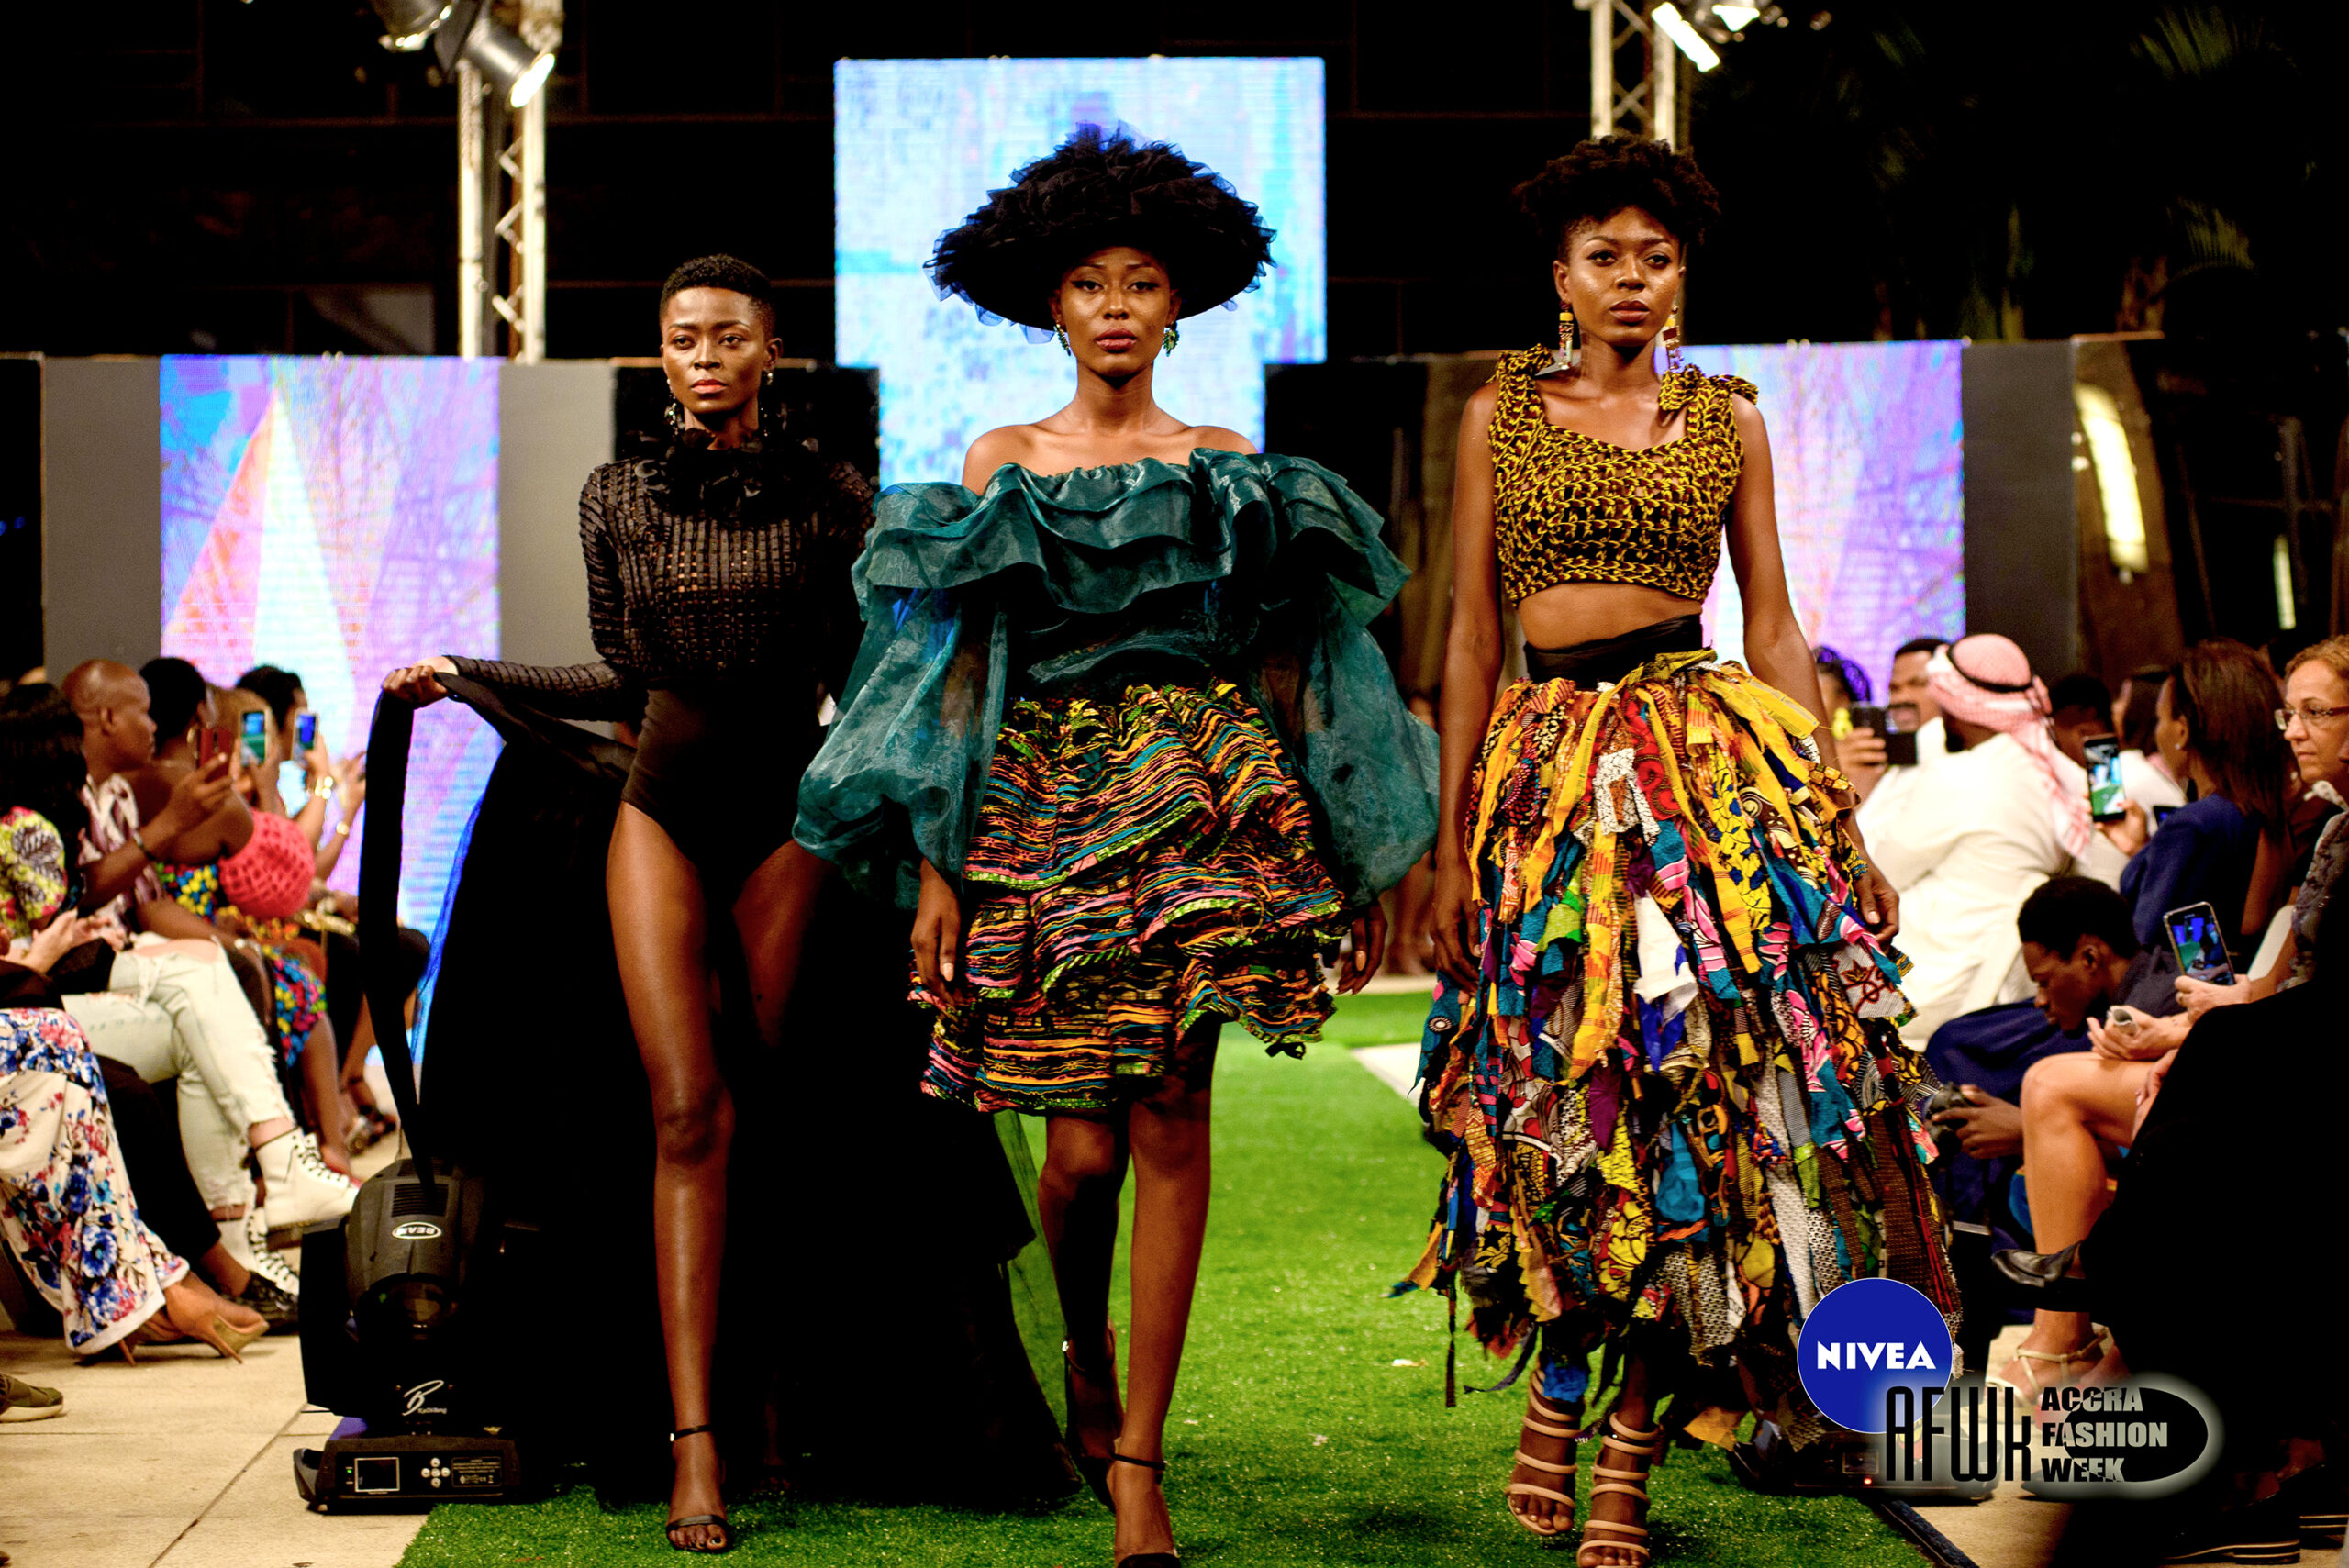 A New Era Of Luxury Fashion Is Emerging, It’s Ethical, It’s Principled & It’s African!